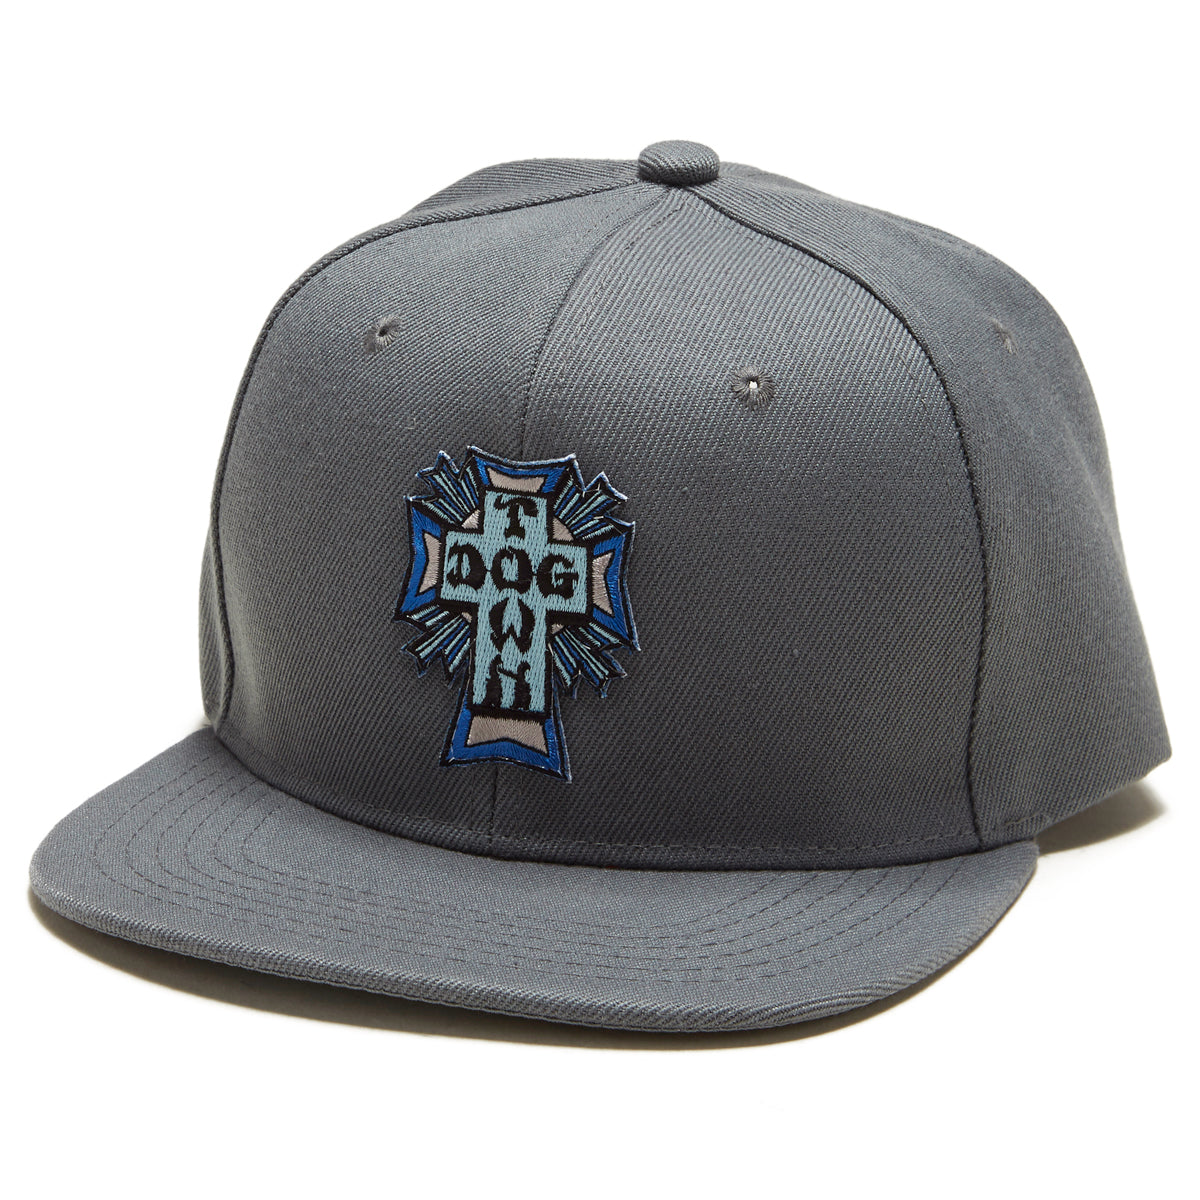 Dogtown Blue Cross Patch Snapback Hat - Charcoal Grey image 1